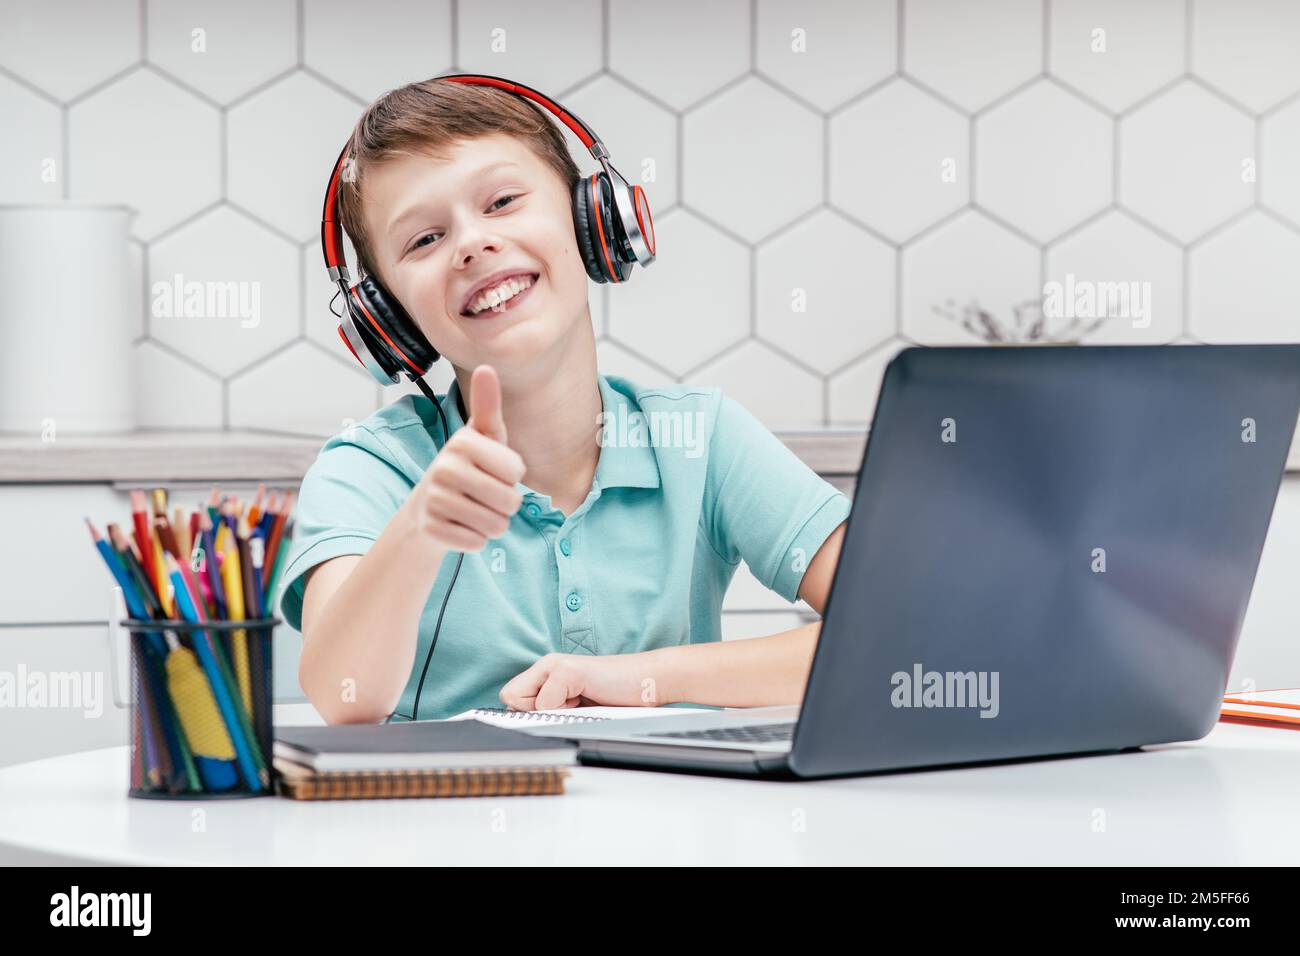 Portrait of young preteen boy wearing blue T-shirt, black red headphones, sitting at desk in front of laptop near houseplant, showing thumb up sign Stock Photo